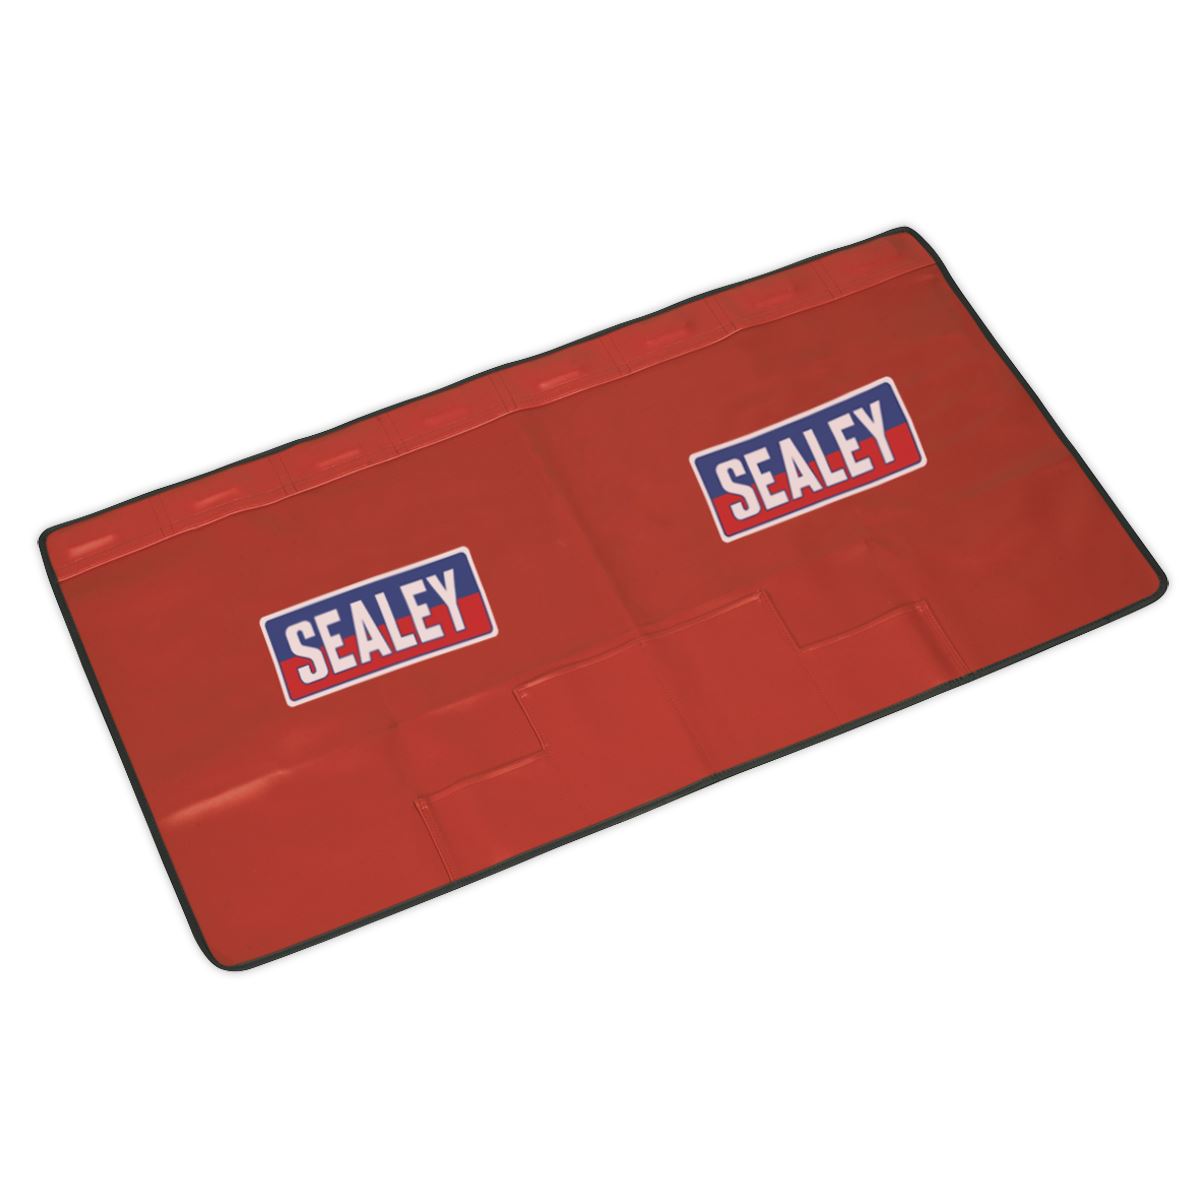 Sealey Wing Cover with 4 Pockets Workshop Magnetic